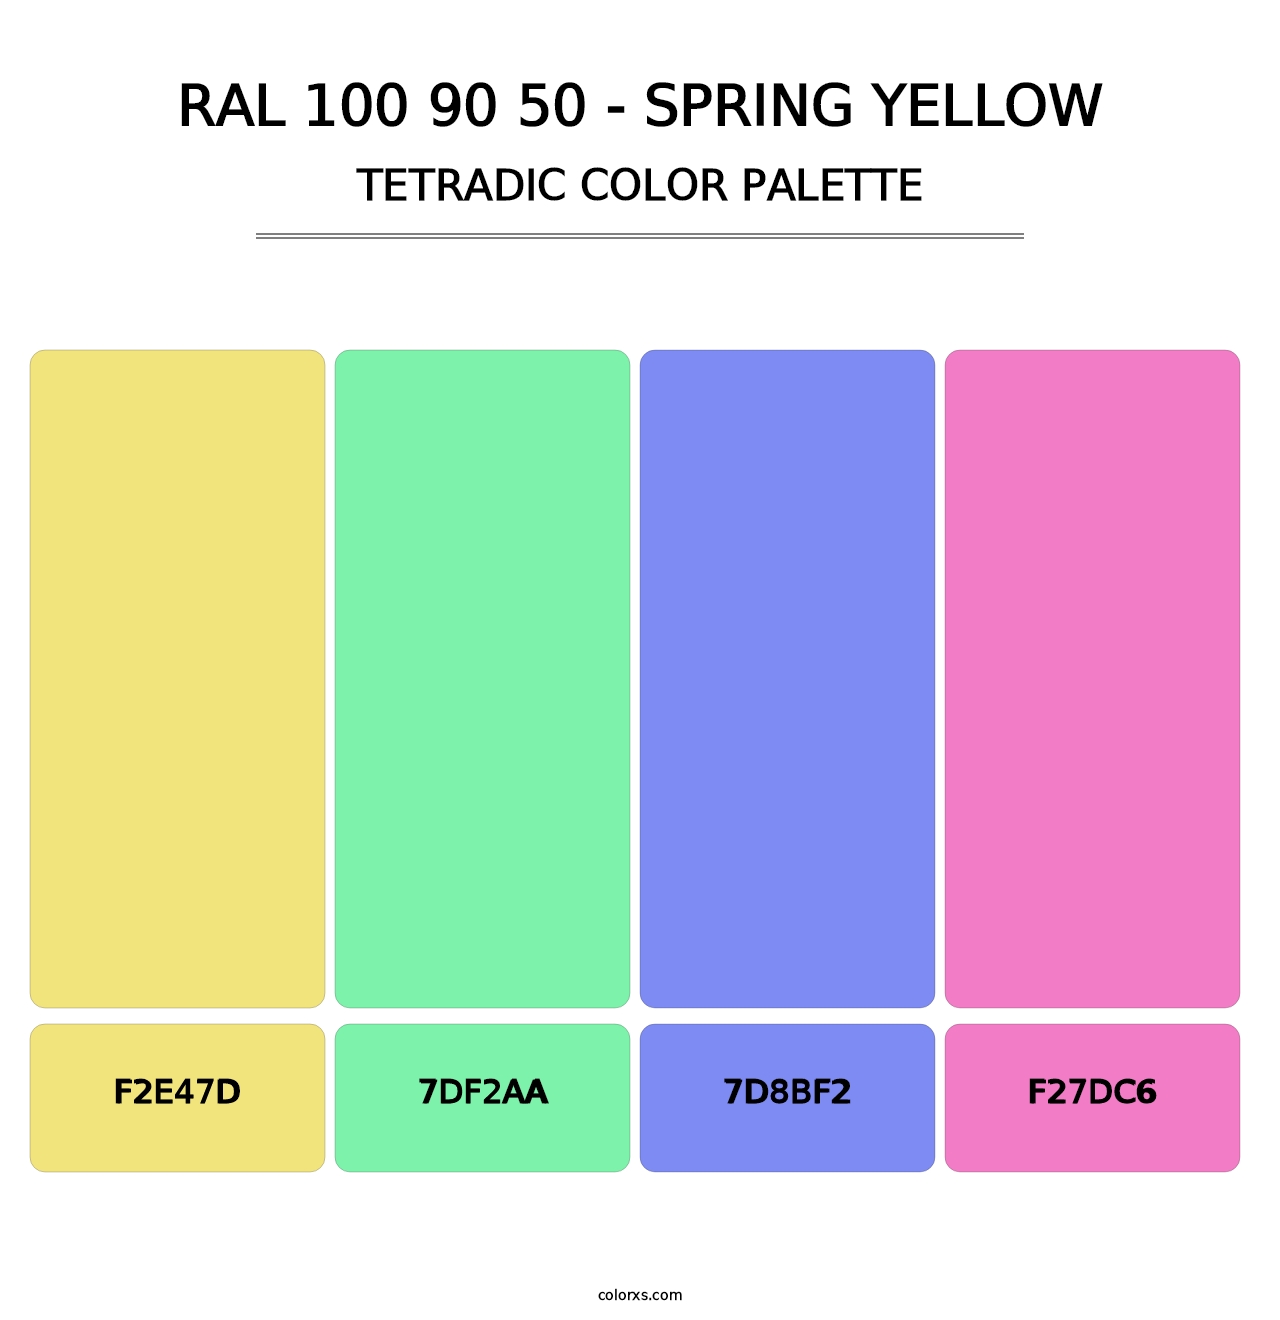 RAL 100 90 50 - Spring Yellow - Tetradic Color Palette